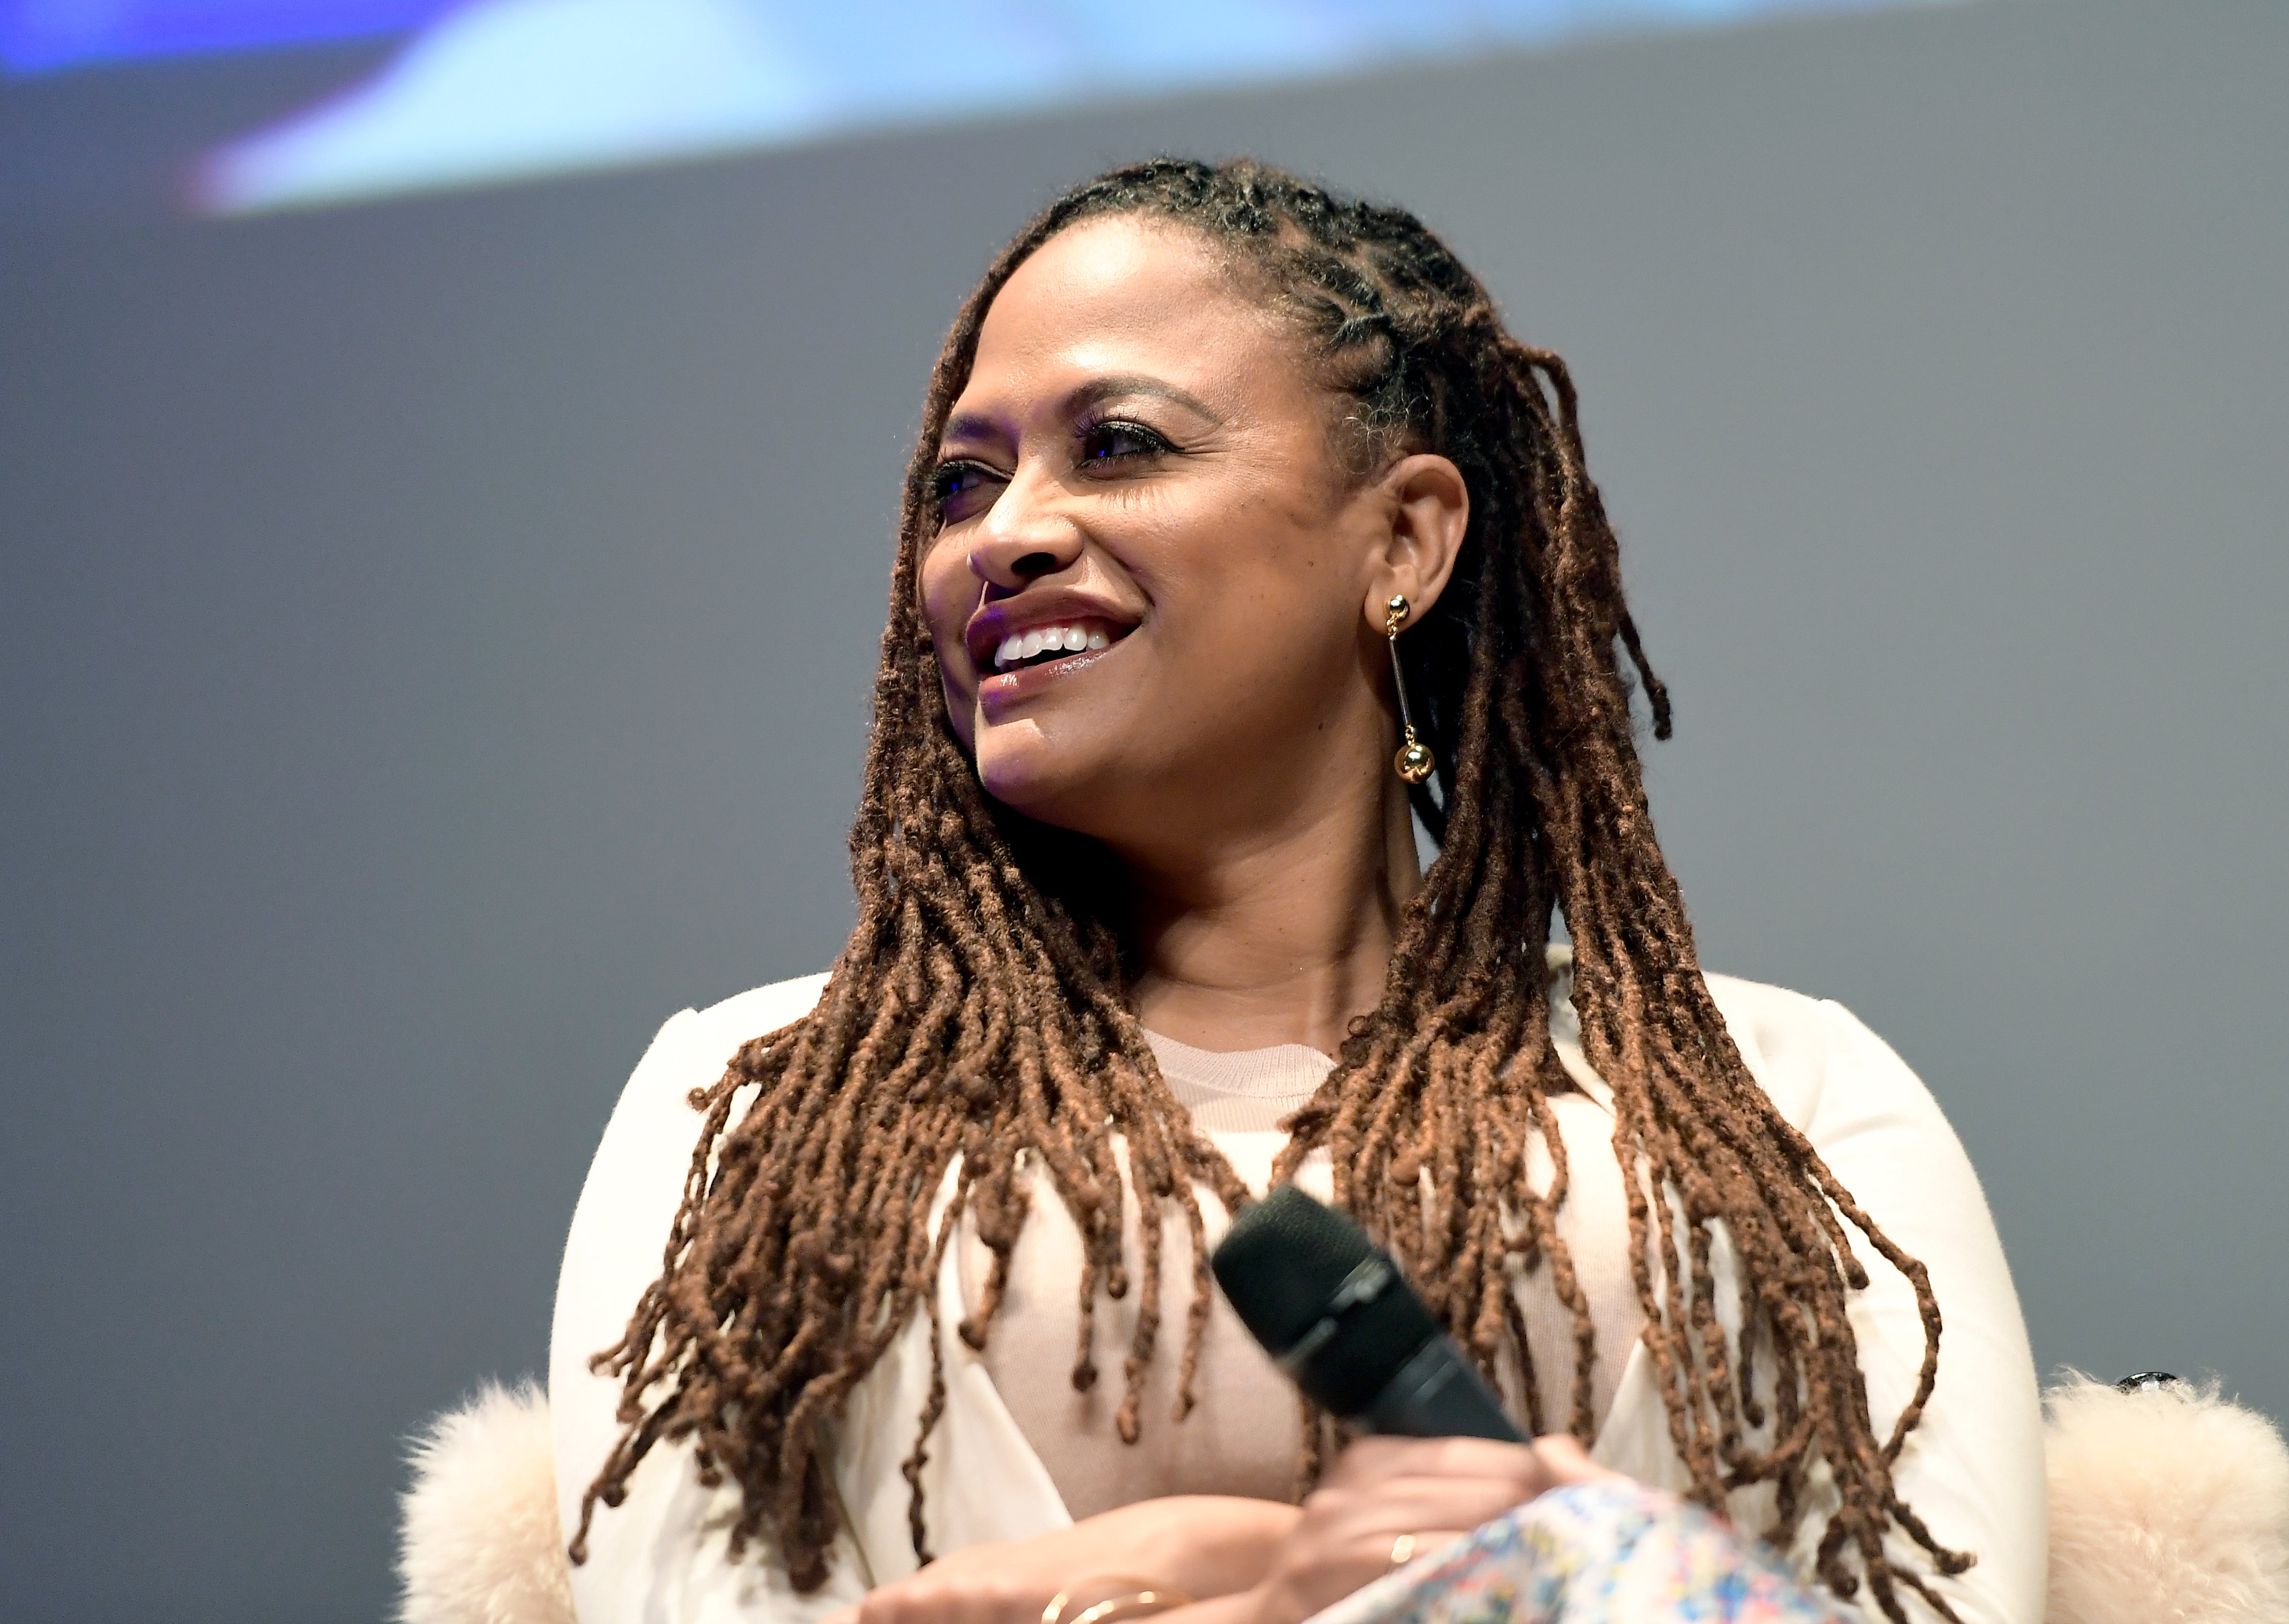 Ava DuVernay Live Tweeted The 'Game Of Thrones' Premiere And Had A Ball
